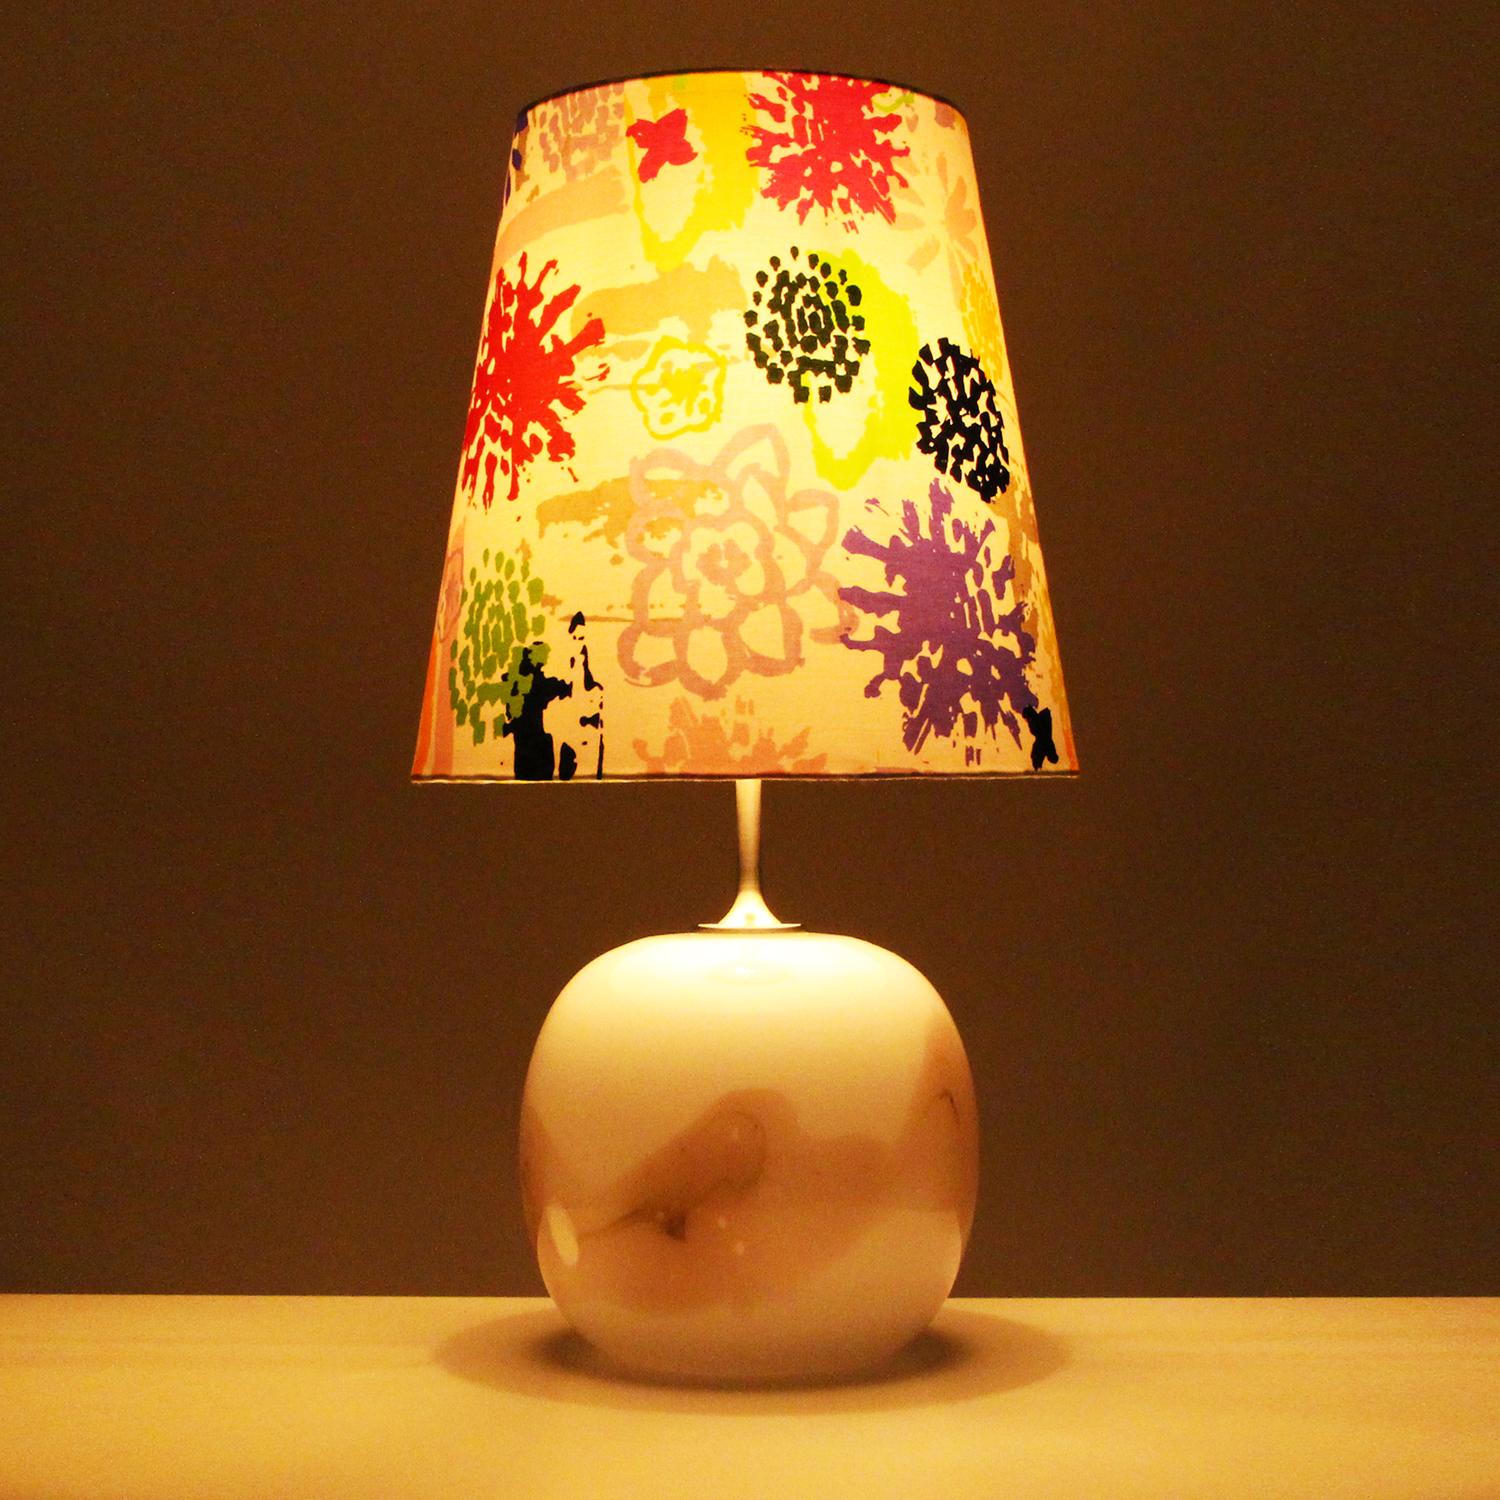 Sakura, large blown glass table lamp by Michael Bang in 1980 for Holmegaard Glassworks - beautiful milky white and rose lamp Stand with large colorful shade included, all in very good vintage condition.

This large round lamp stand is made up of